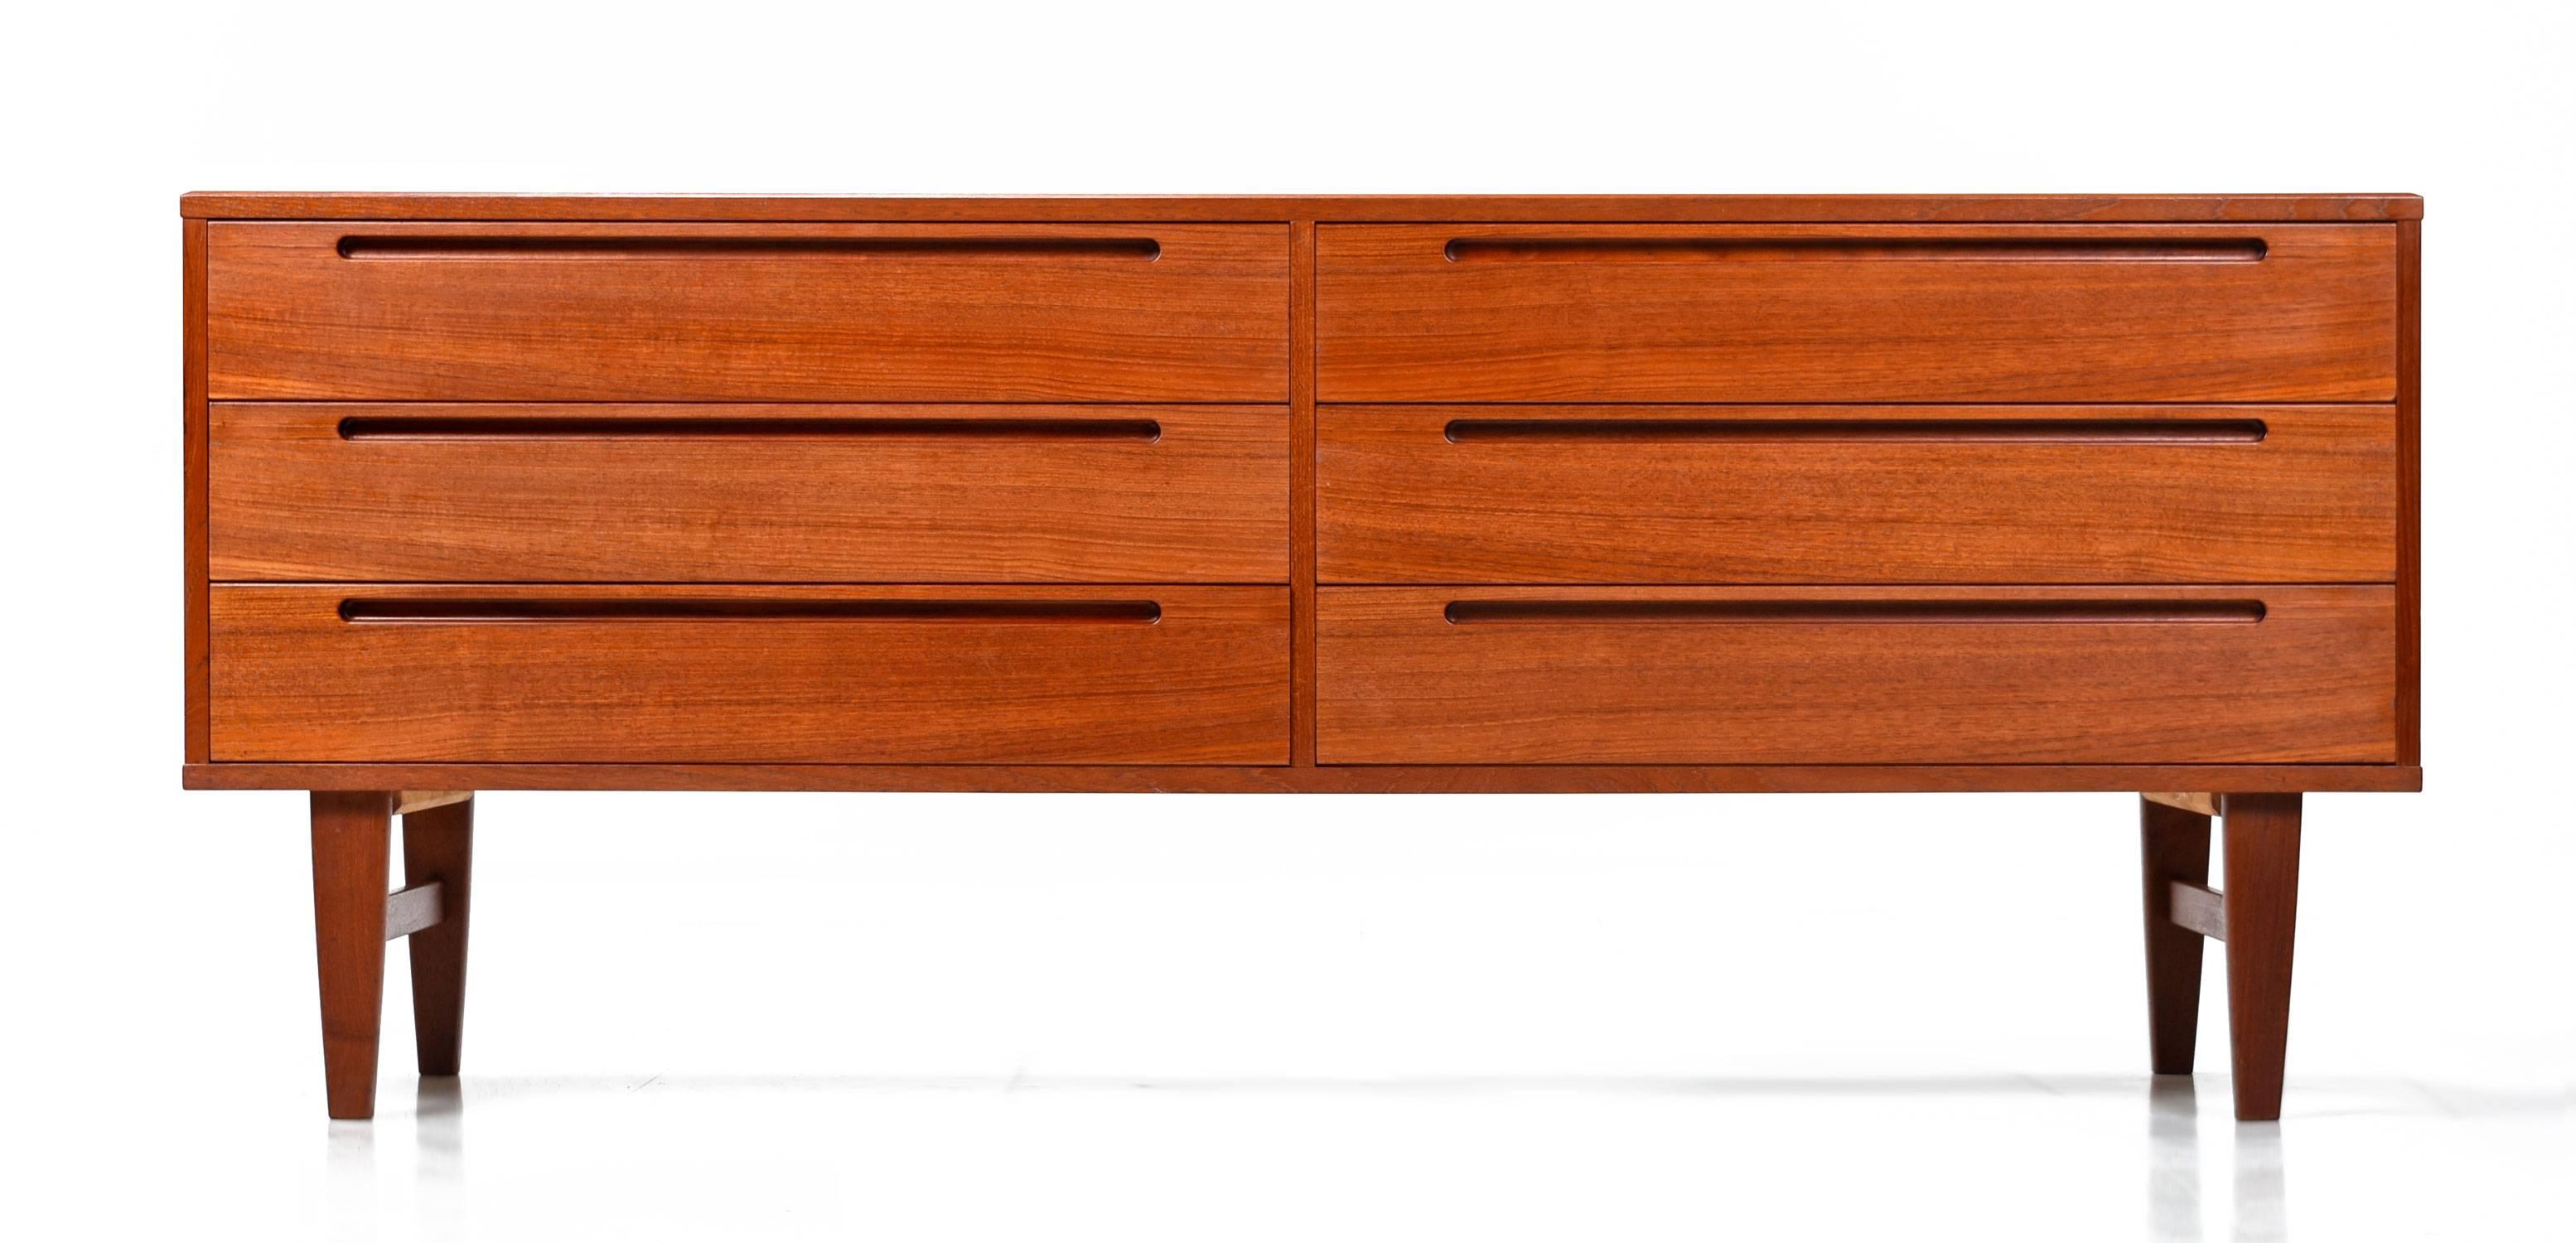 Expertly crafted Mid-Century Modern Danish teak dresser by Nils Jonsson for HJN Mobler. This pieces is an exemplary specimen of Danish cabinet making. Tightly dovetailed drawers, no particle board, beautiful teak wood and easy gliding drawers are